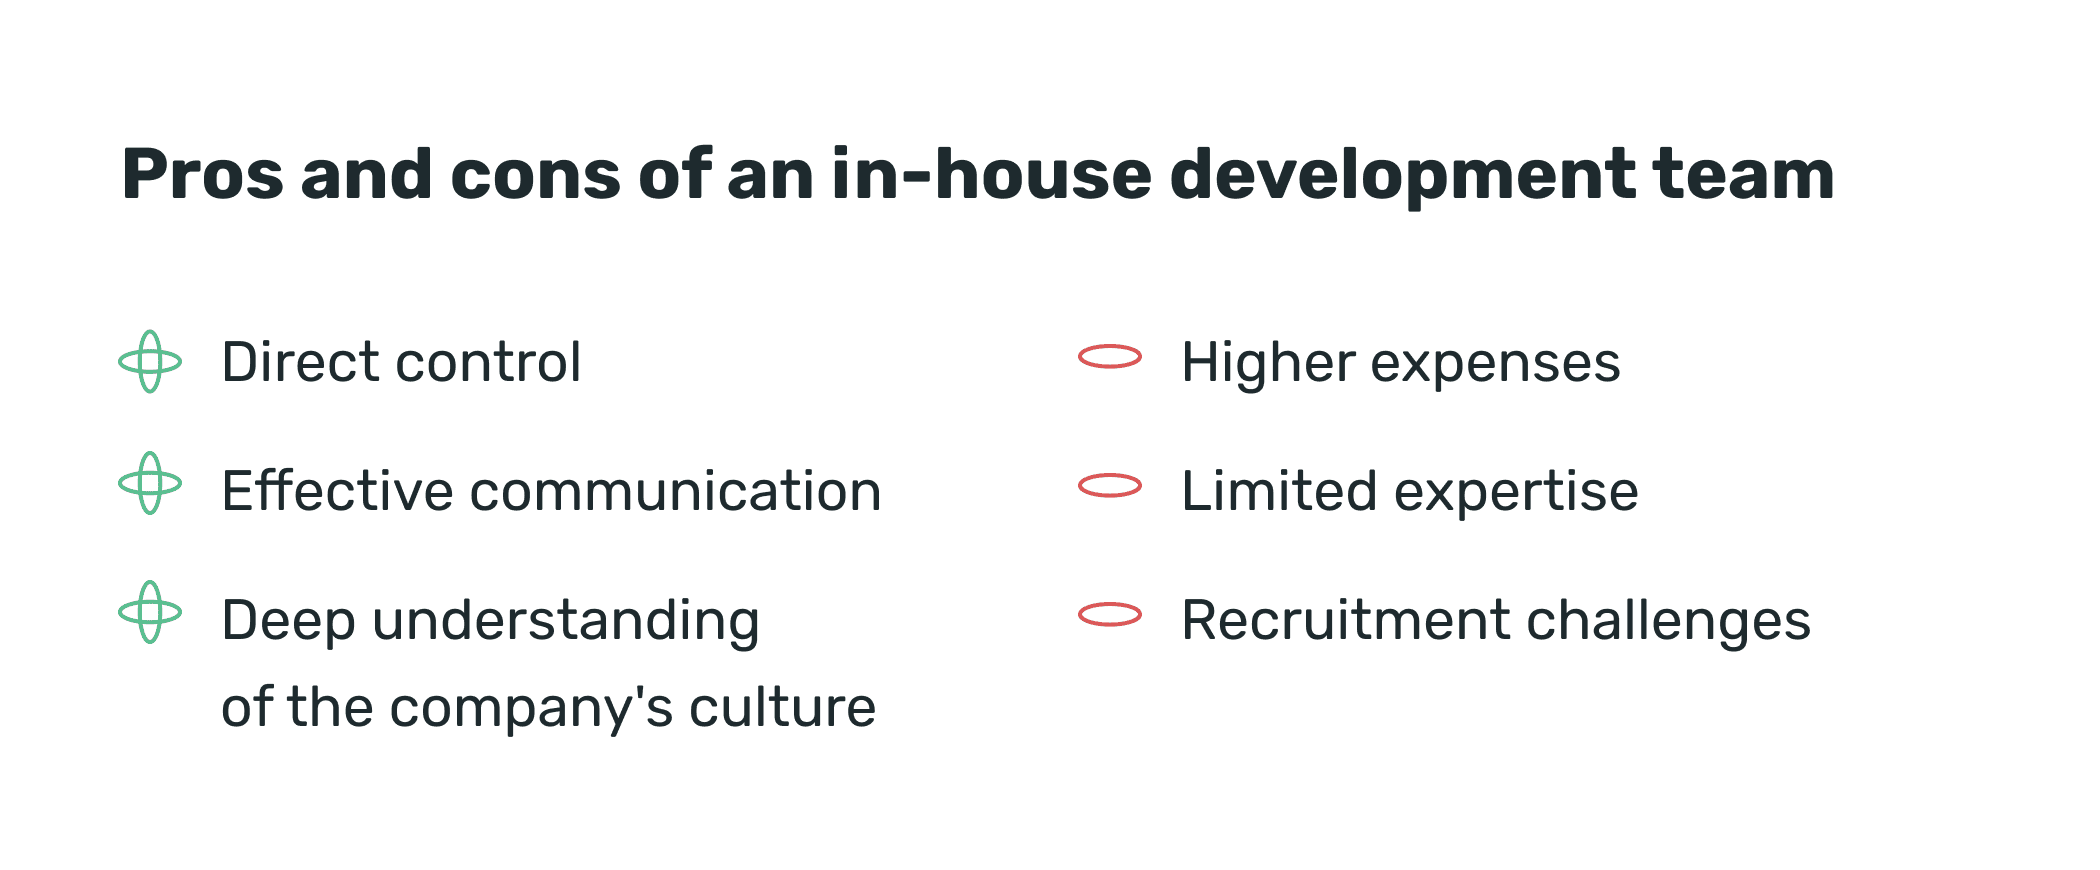 Pros and cons of an in-house development team